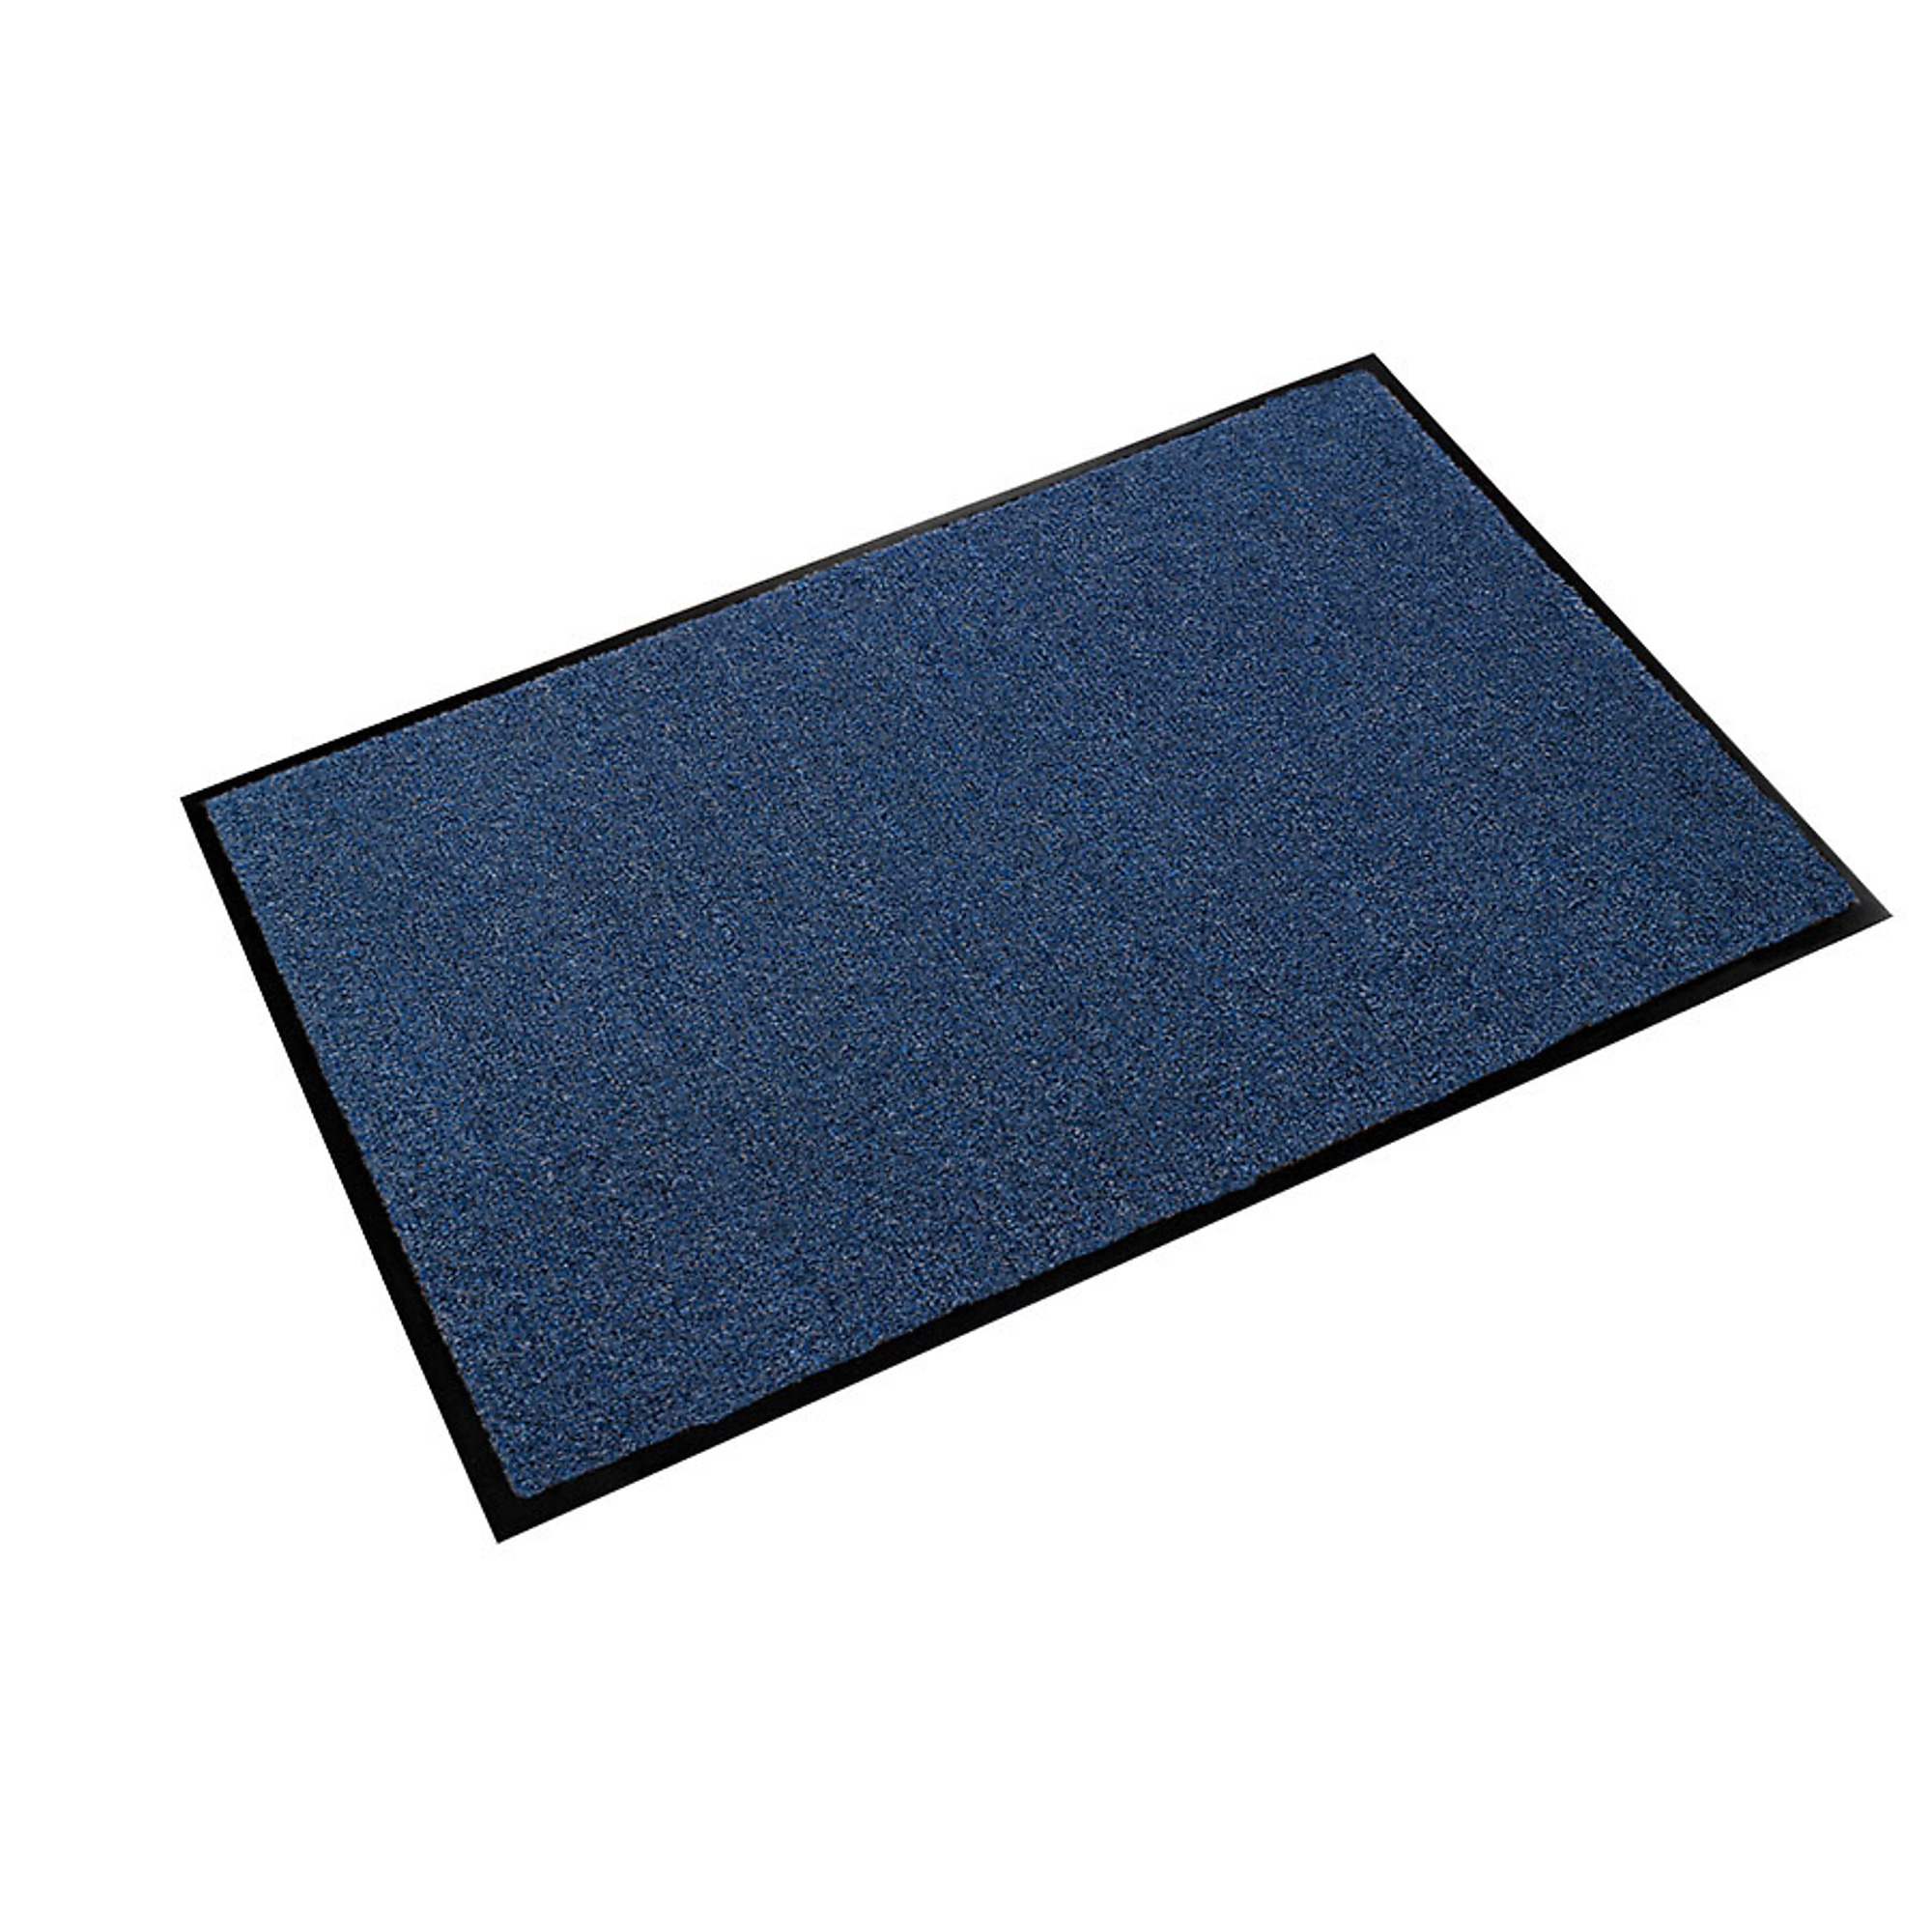 Crown Matting Technologies, Rely-On Olefin 4ft.x6ft. Marlin Blue, Width 48 in, Length 72 in, Thickness 3/8 in, Model GS 0046MB